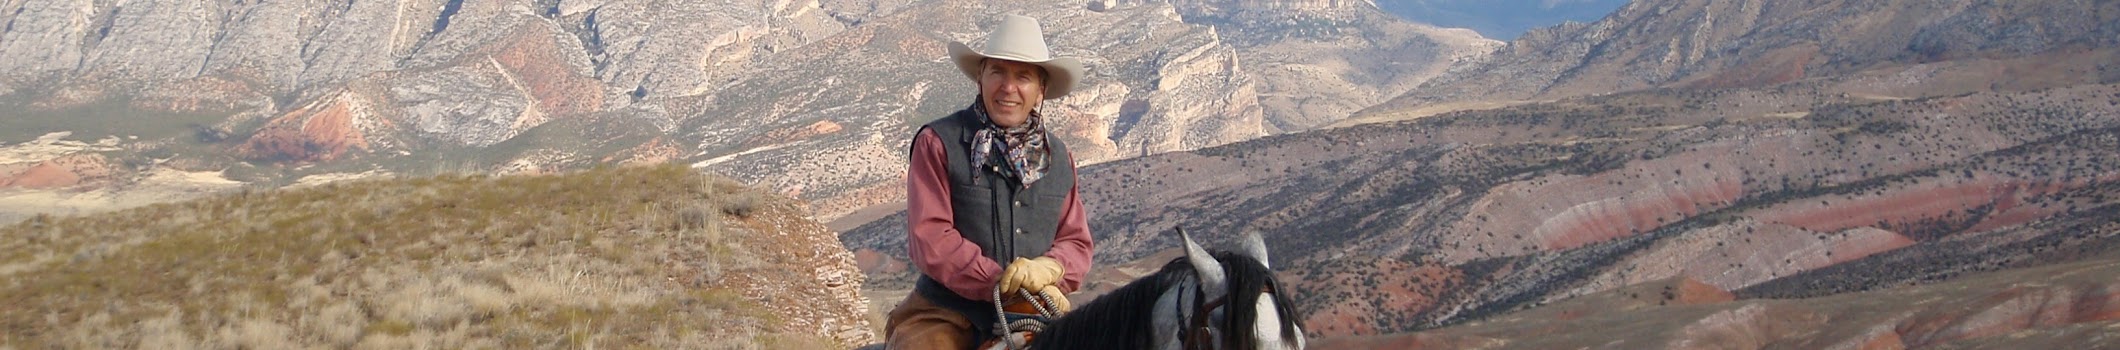 Mark Bedor of Today's Wild West riding on horseback in an expansive valley with a mountainous landscape behind him.